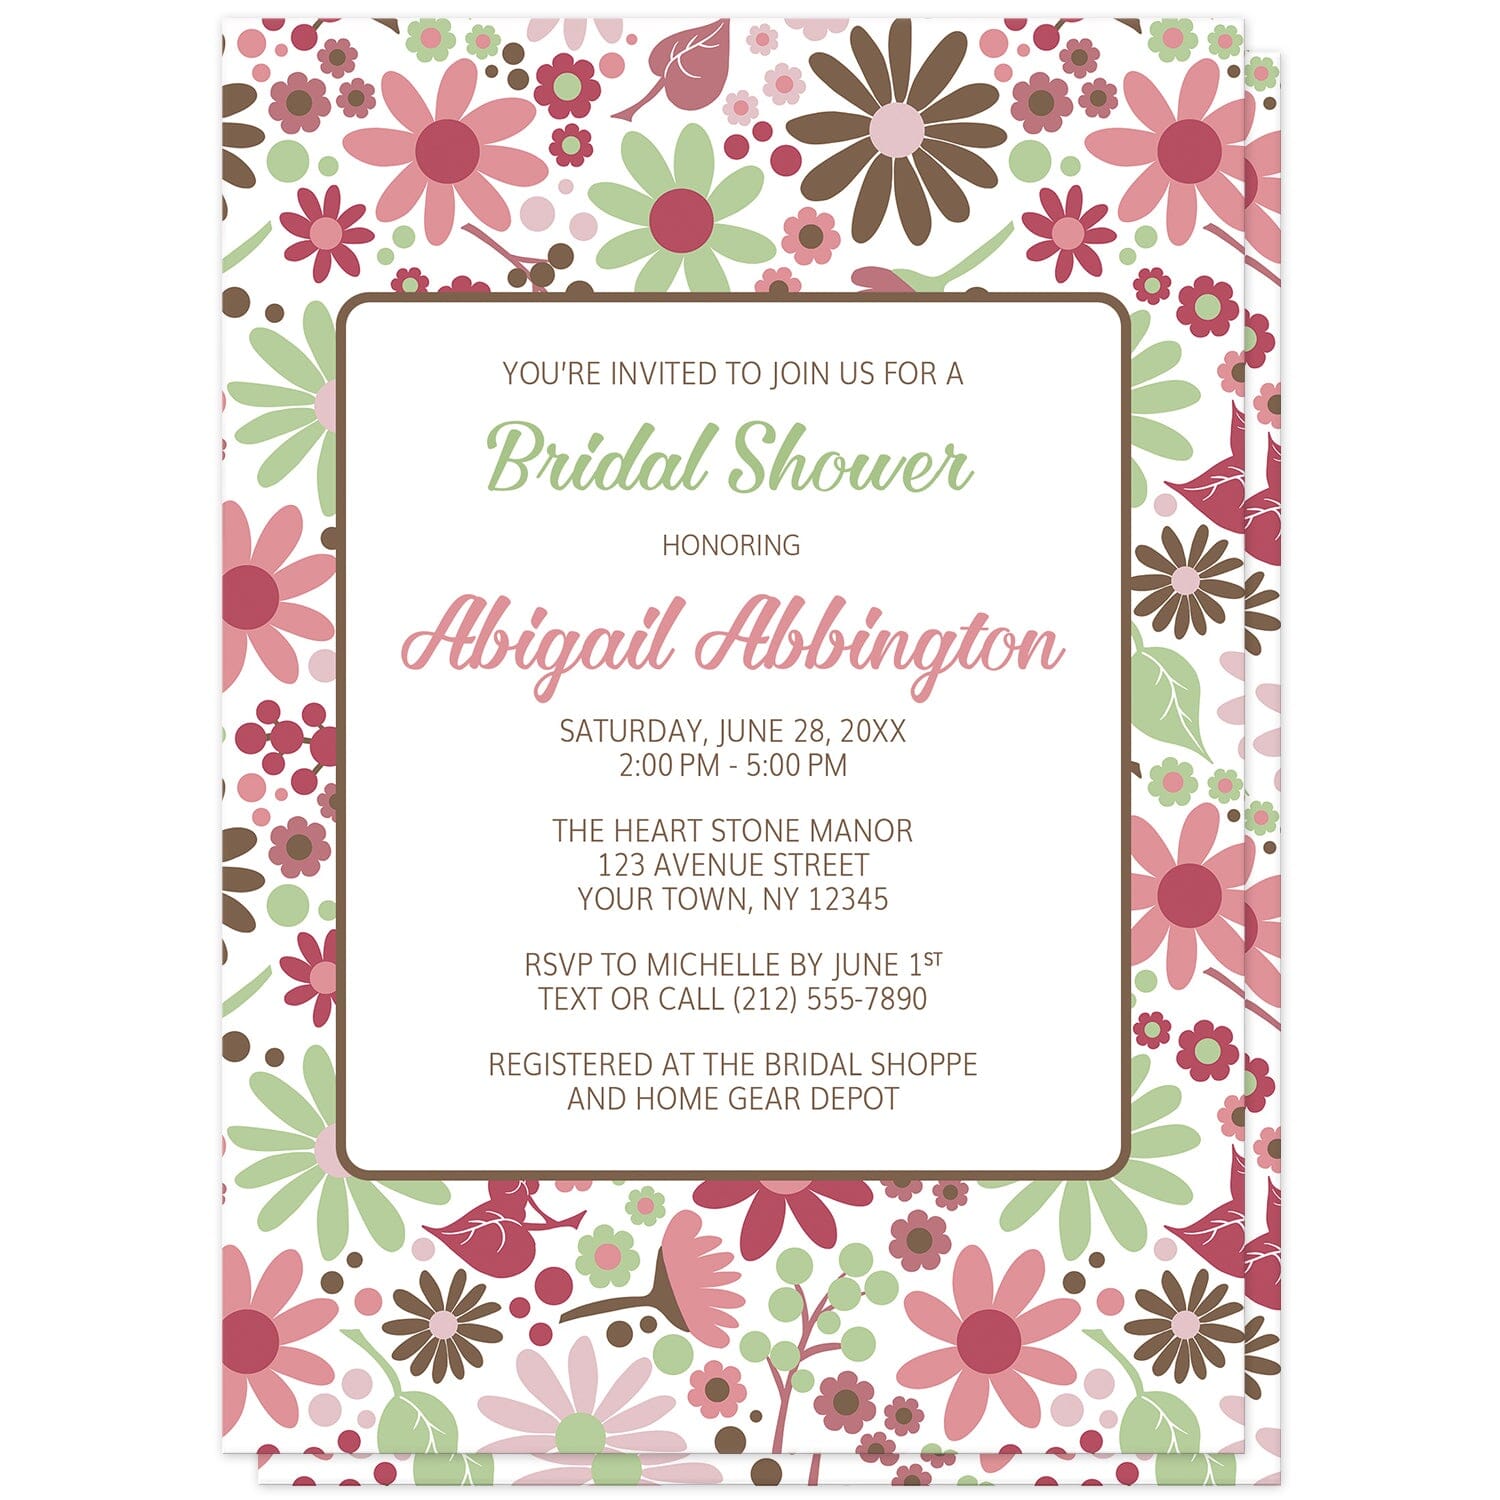 Berry Green Summer Flowers Bridal Shower Invitations (front) at Artistically Invited. Beautiful berry green summer flowers bridal shower invitations designed with a pretty summer floral pattern in different hues of berry pink with green and brown. Your personalized bridal shower celebration details are custom printed in green, pink, and brown on white over the flowers pattern.